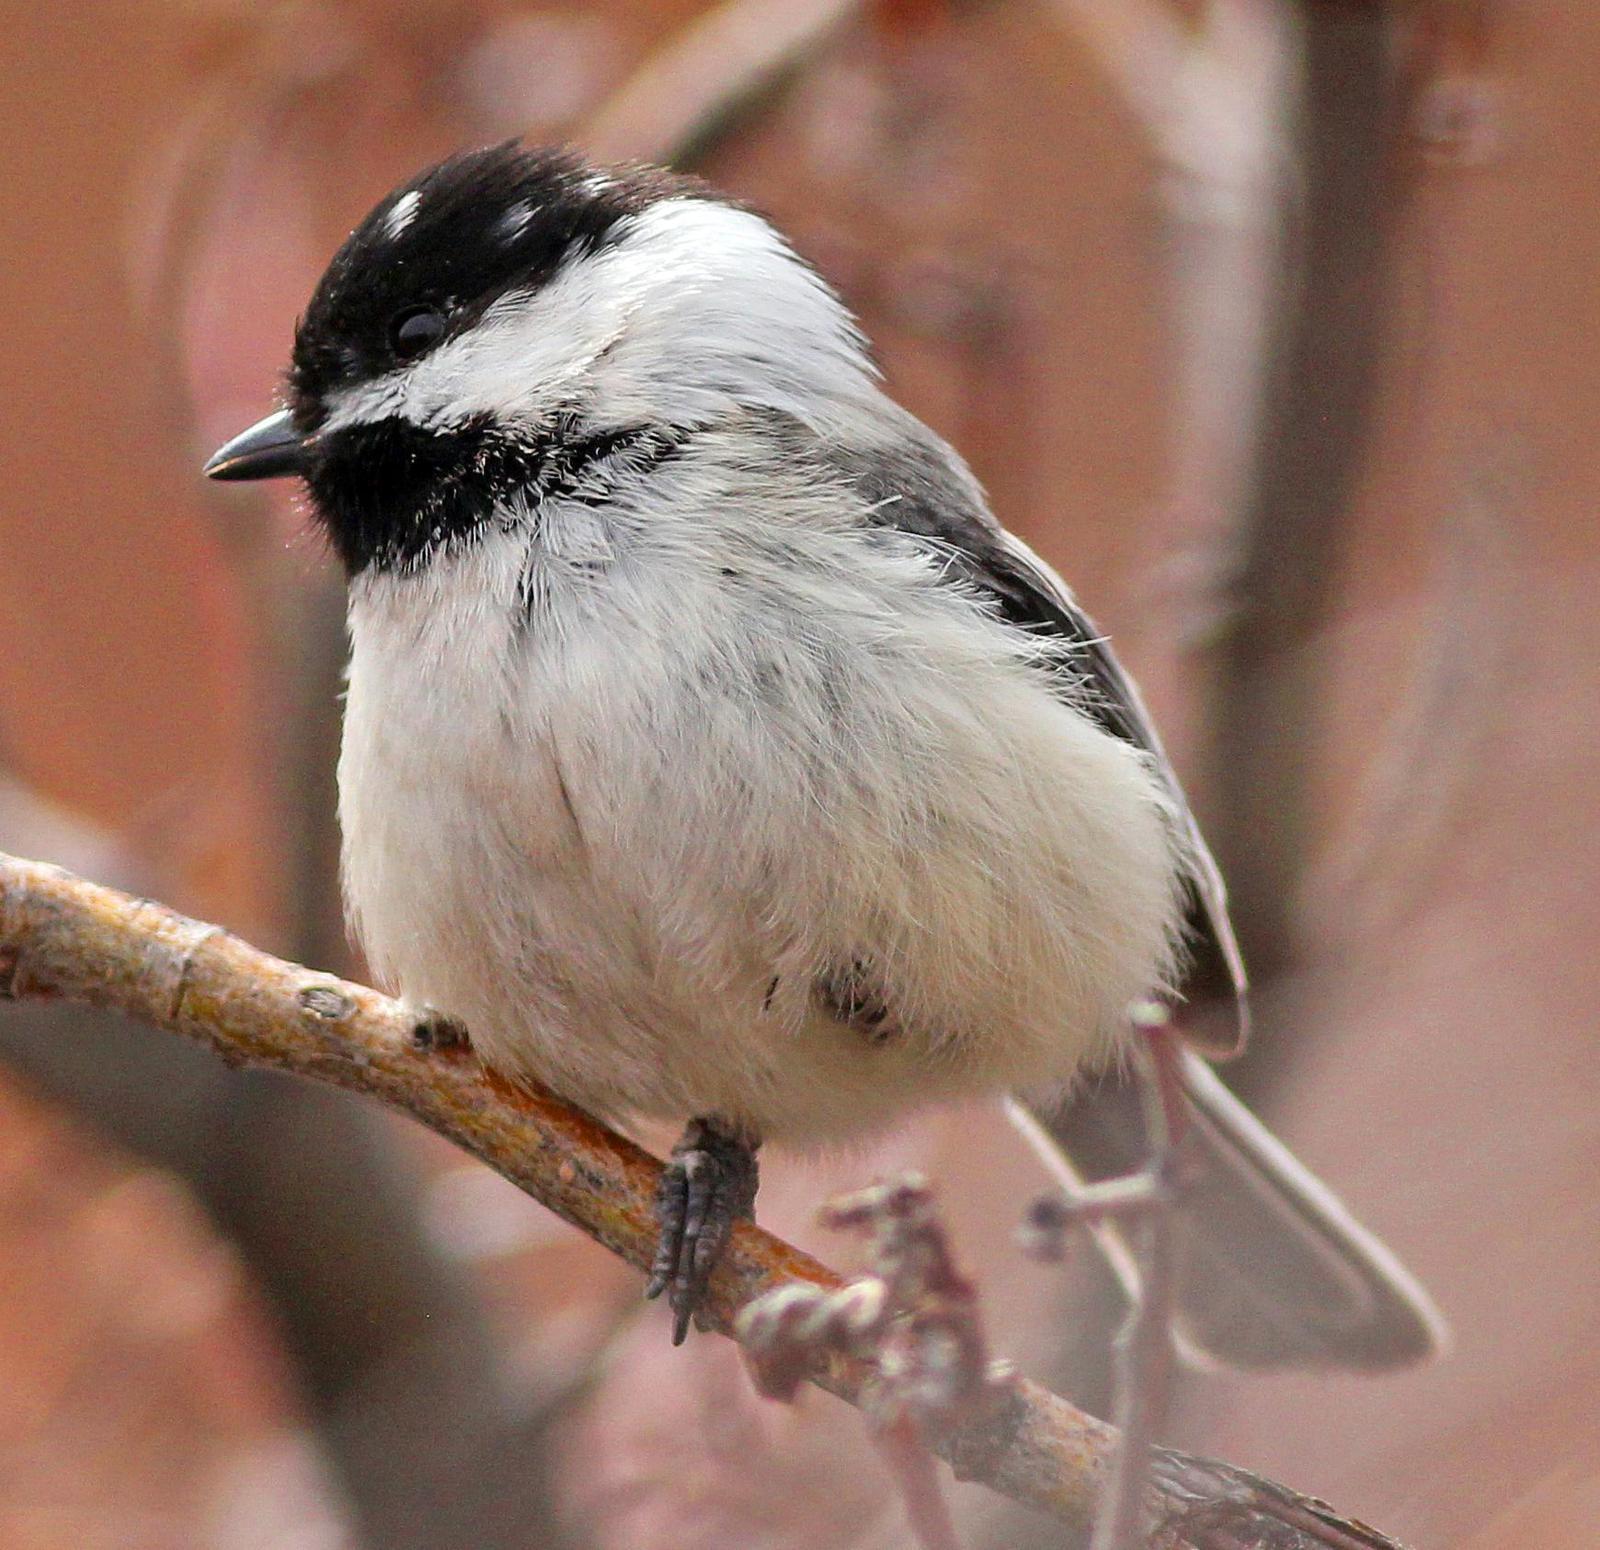 Black-capped Chickadee Photo by Tom Gannon